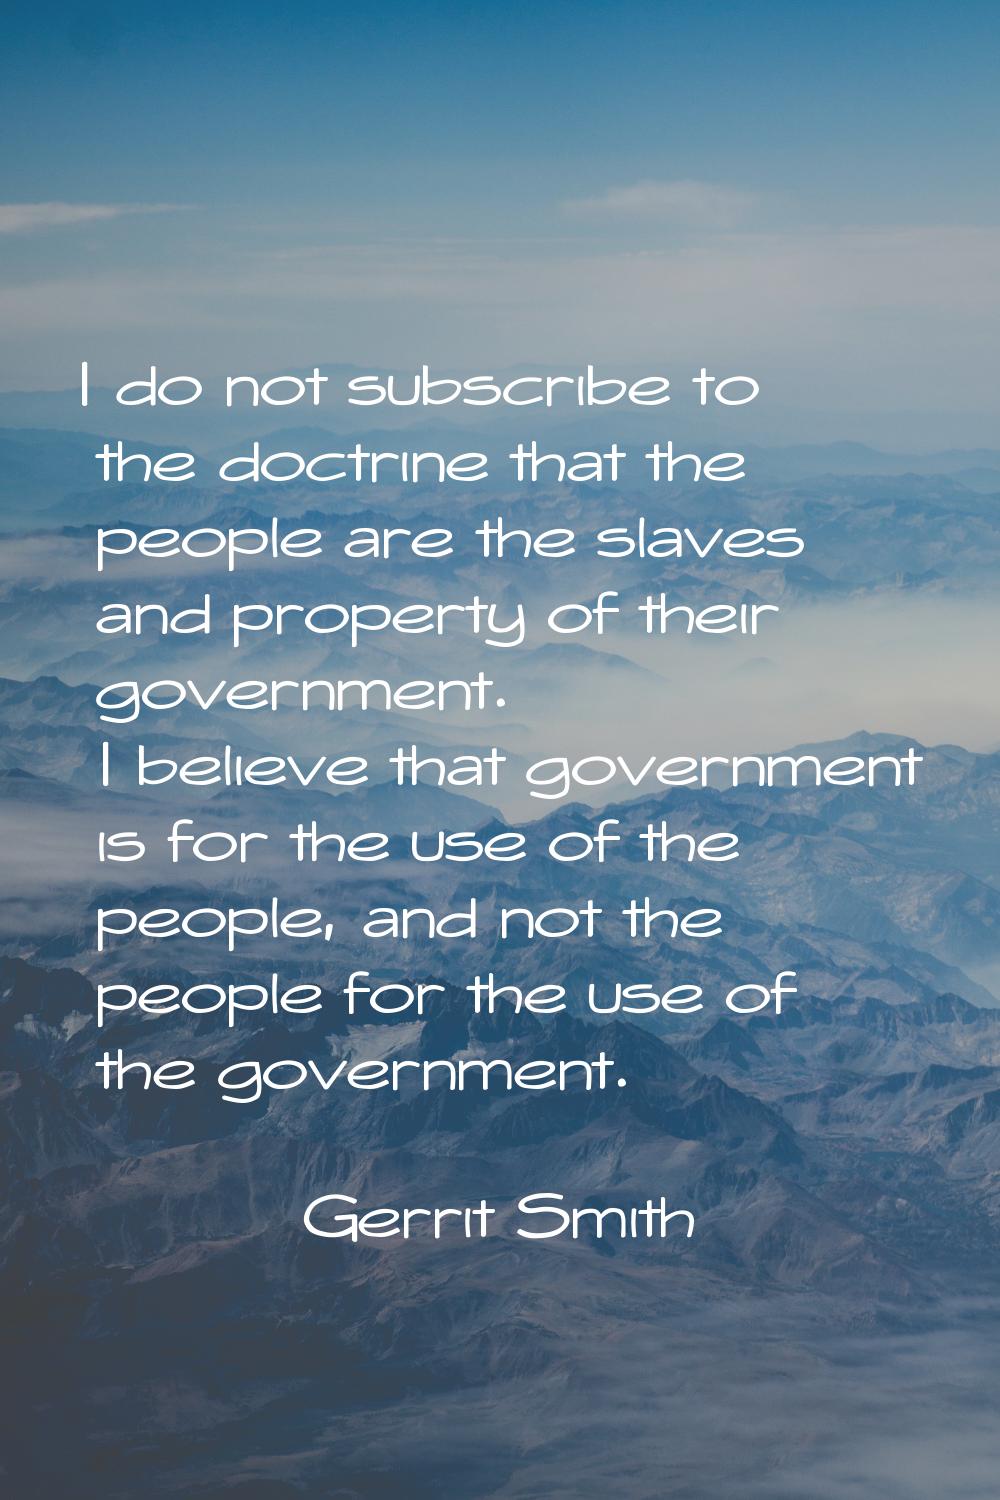 I do not subscribe to the doctrine that the people are the slaves and property of their government.